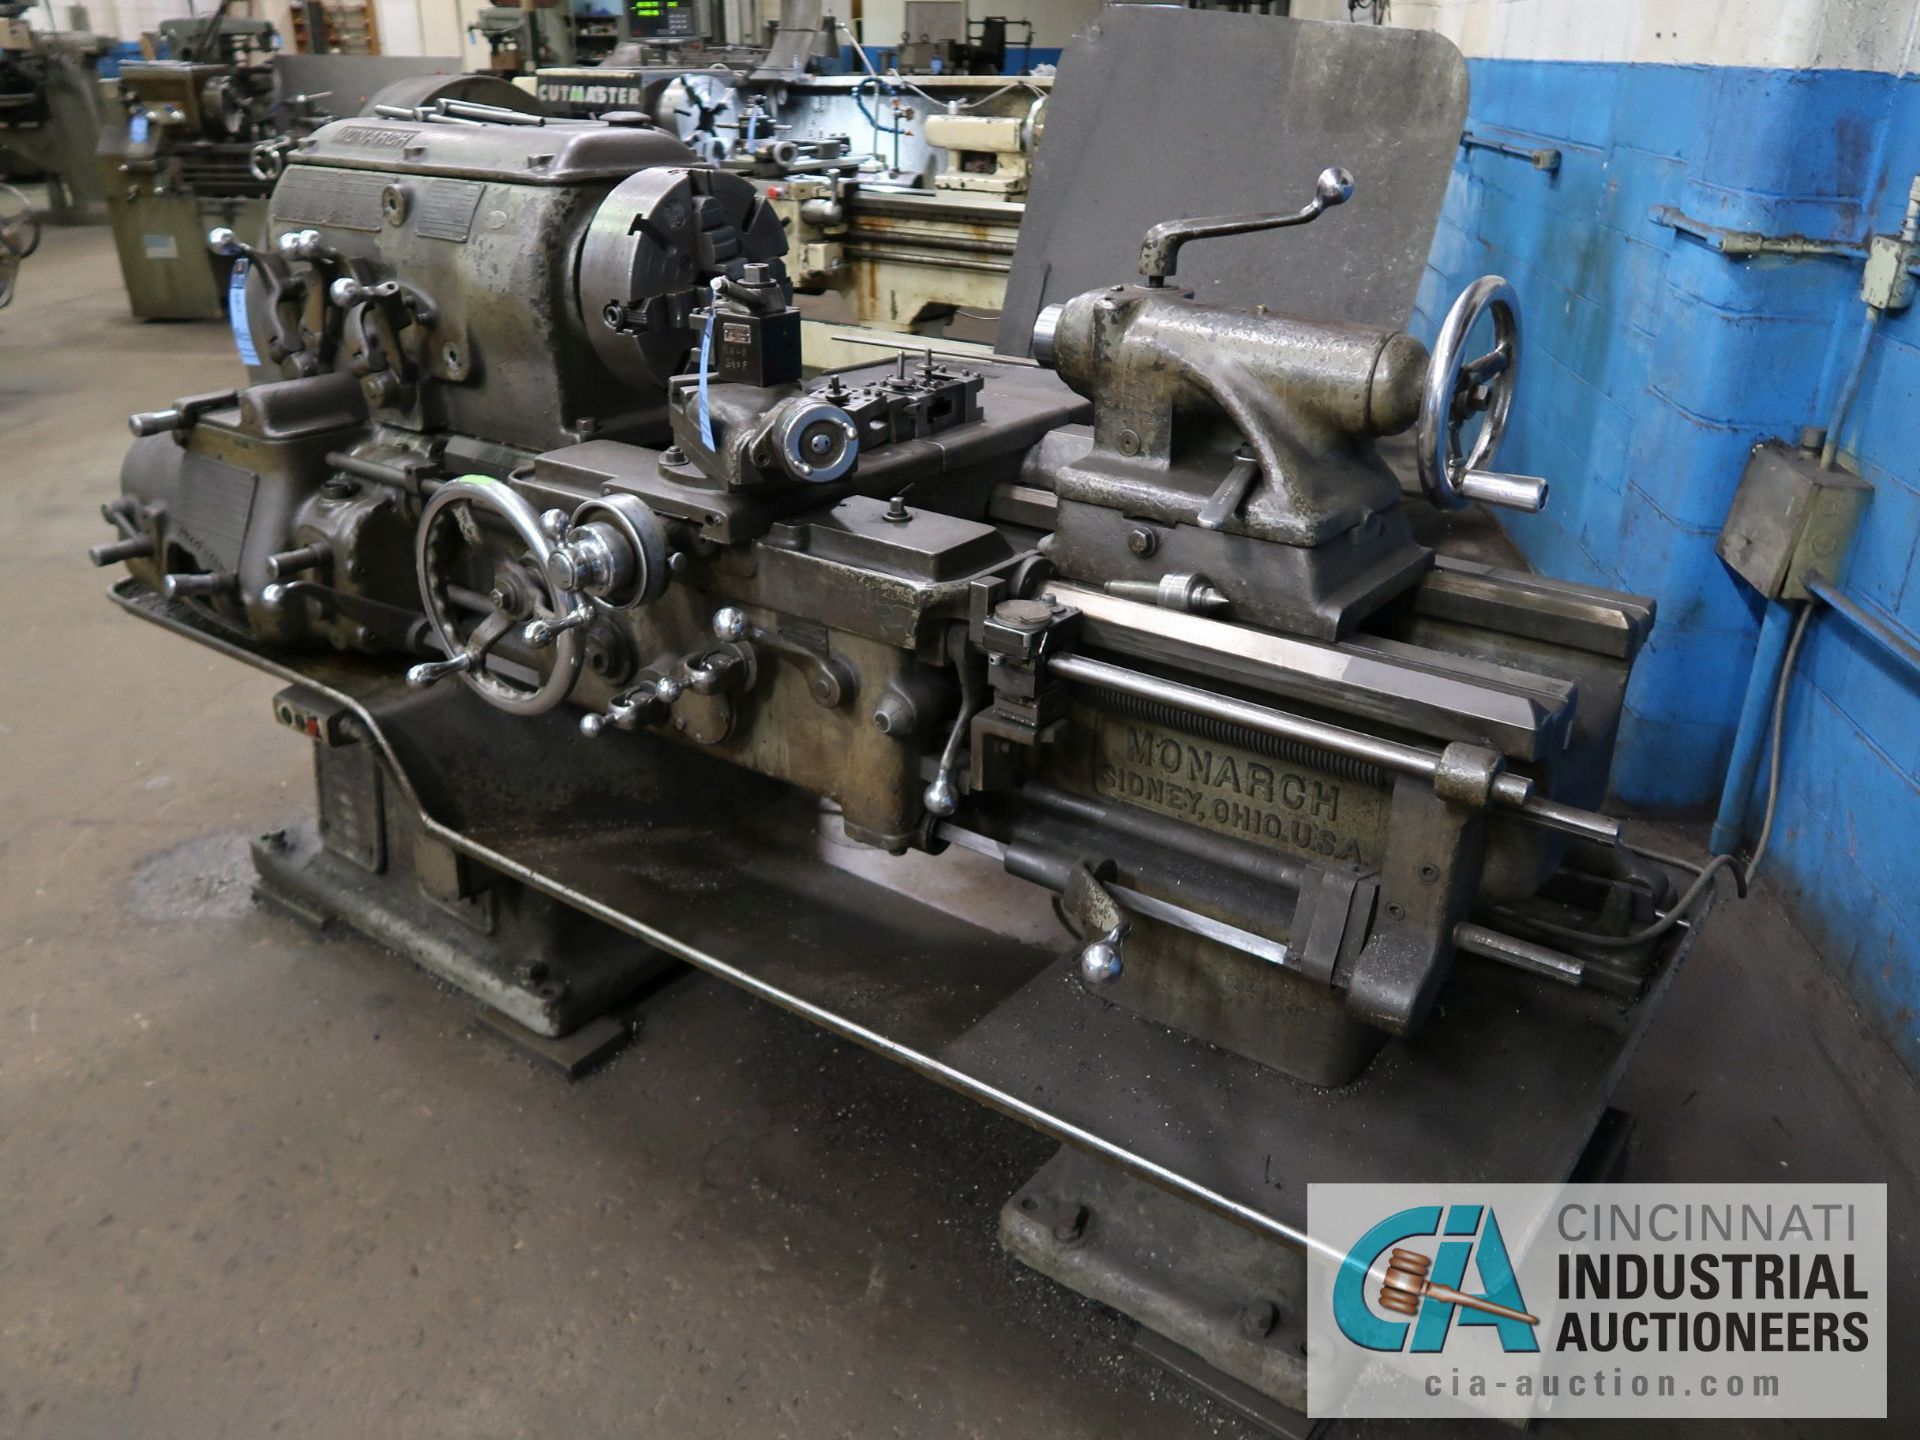 20" X 30" MONARCH MODEL CY LATHE; S/N CY16278K18-8, 12" 4-JAW CHUCK, 2" SPINDLE BORE, SPEEDS TO - Image 2 of 10